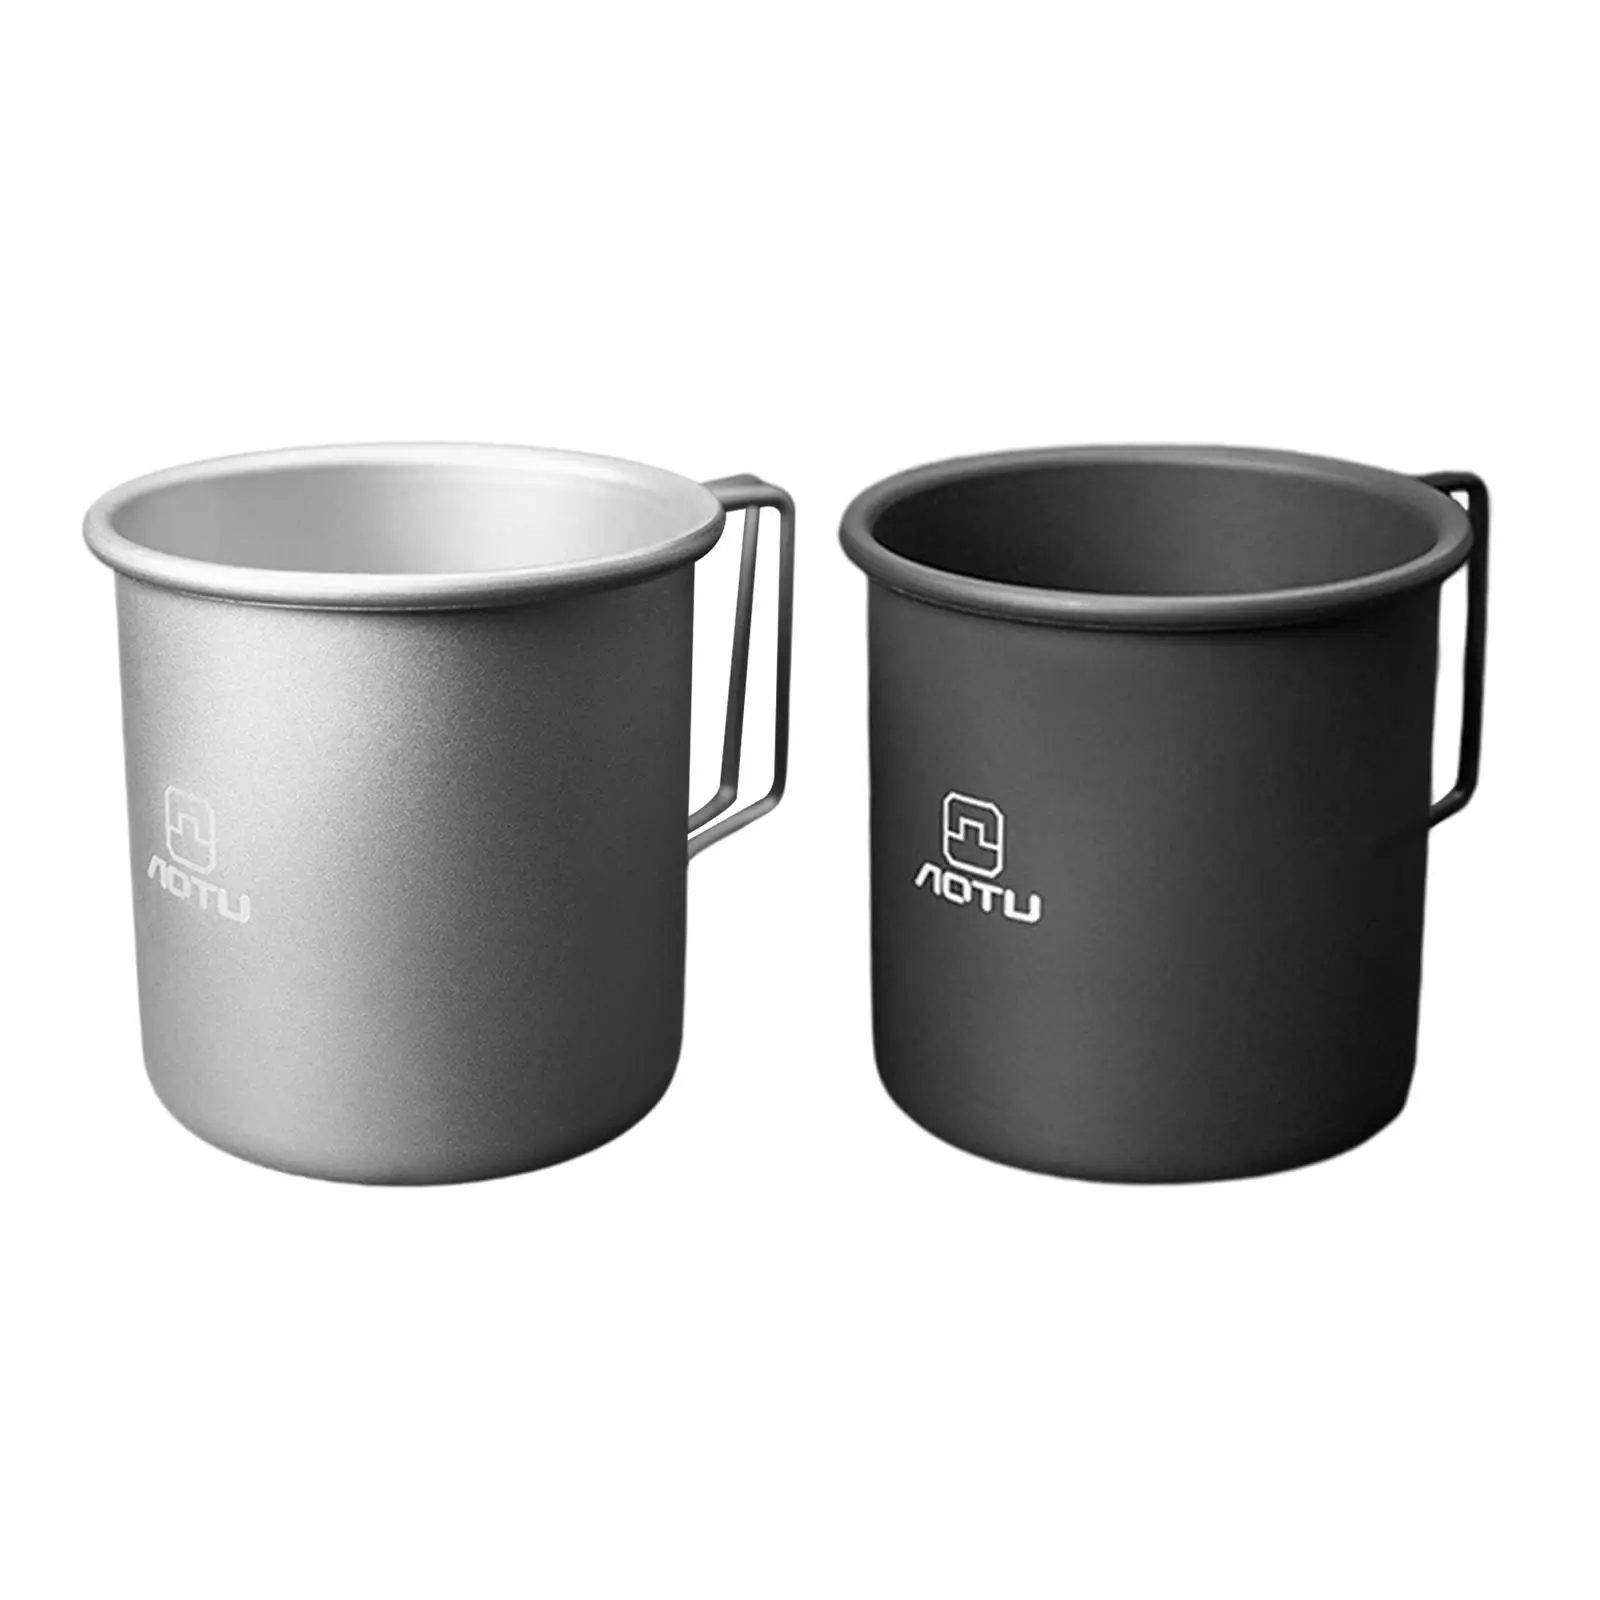 Outdoor Camping Cup Coffee Mug Folding Handle Tableware Lightweight 300ml Water Cup for Hiking Picnic Fishing Hunting Survival